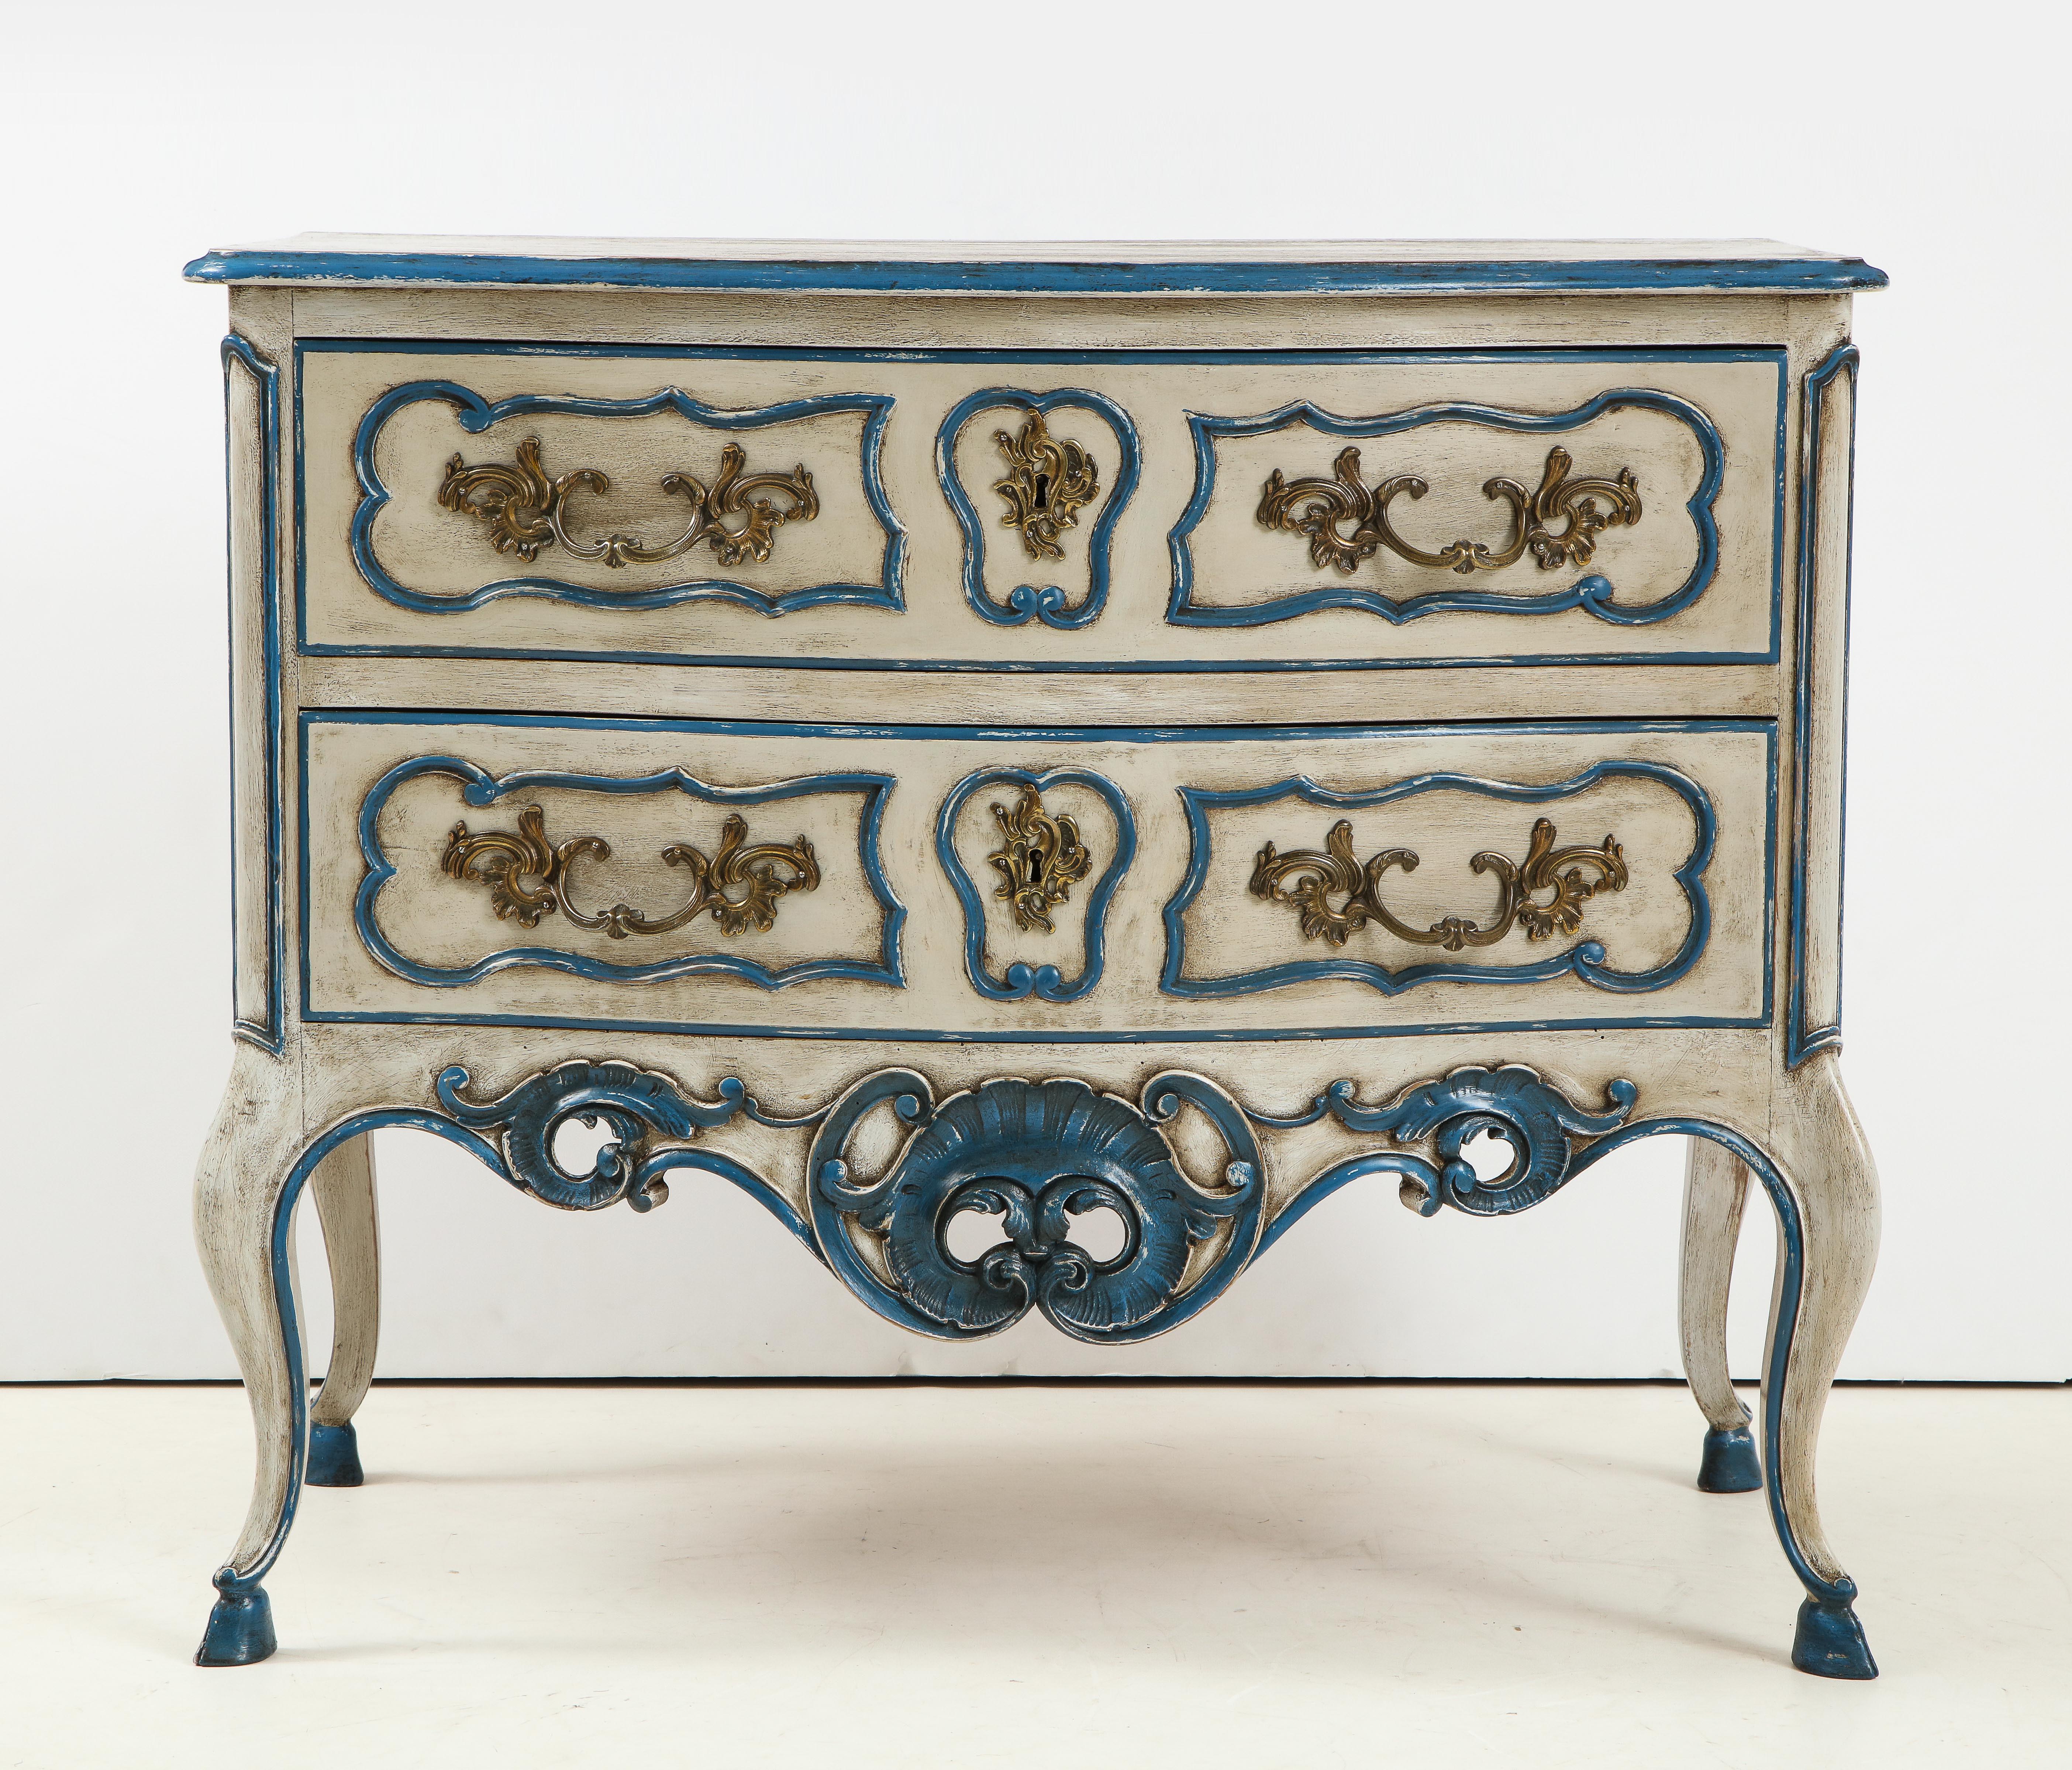 A charming commode from Provence in the Louis XV style. This lovely piece is painted in a soft creamy gray with stunning peacock blue accents. The commode has two drawers with original brass pulls and is raised on cabriole legs.